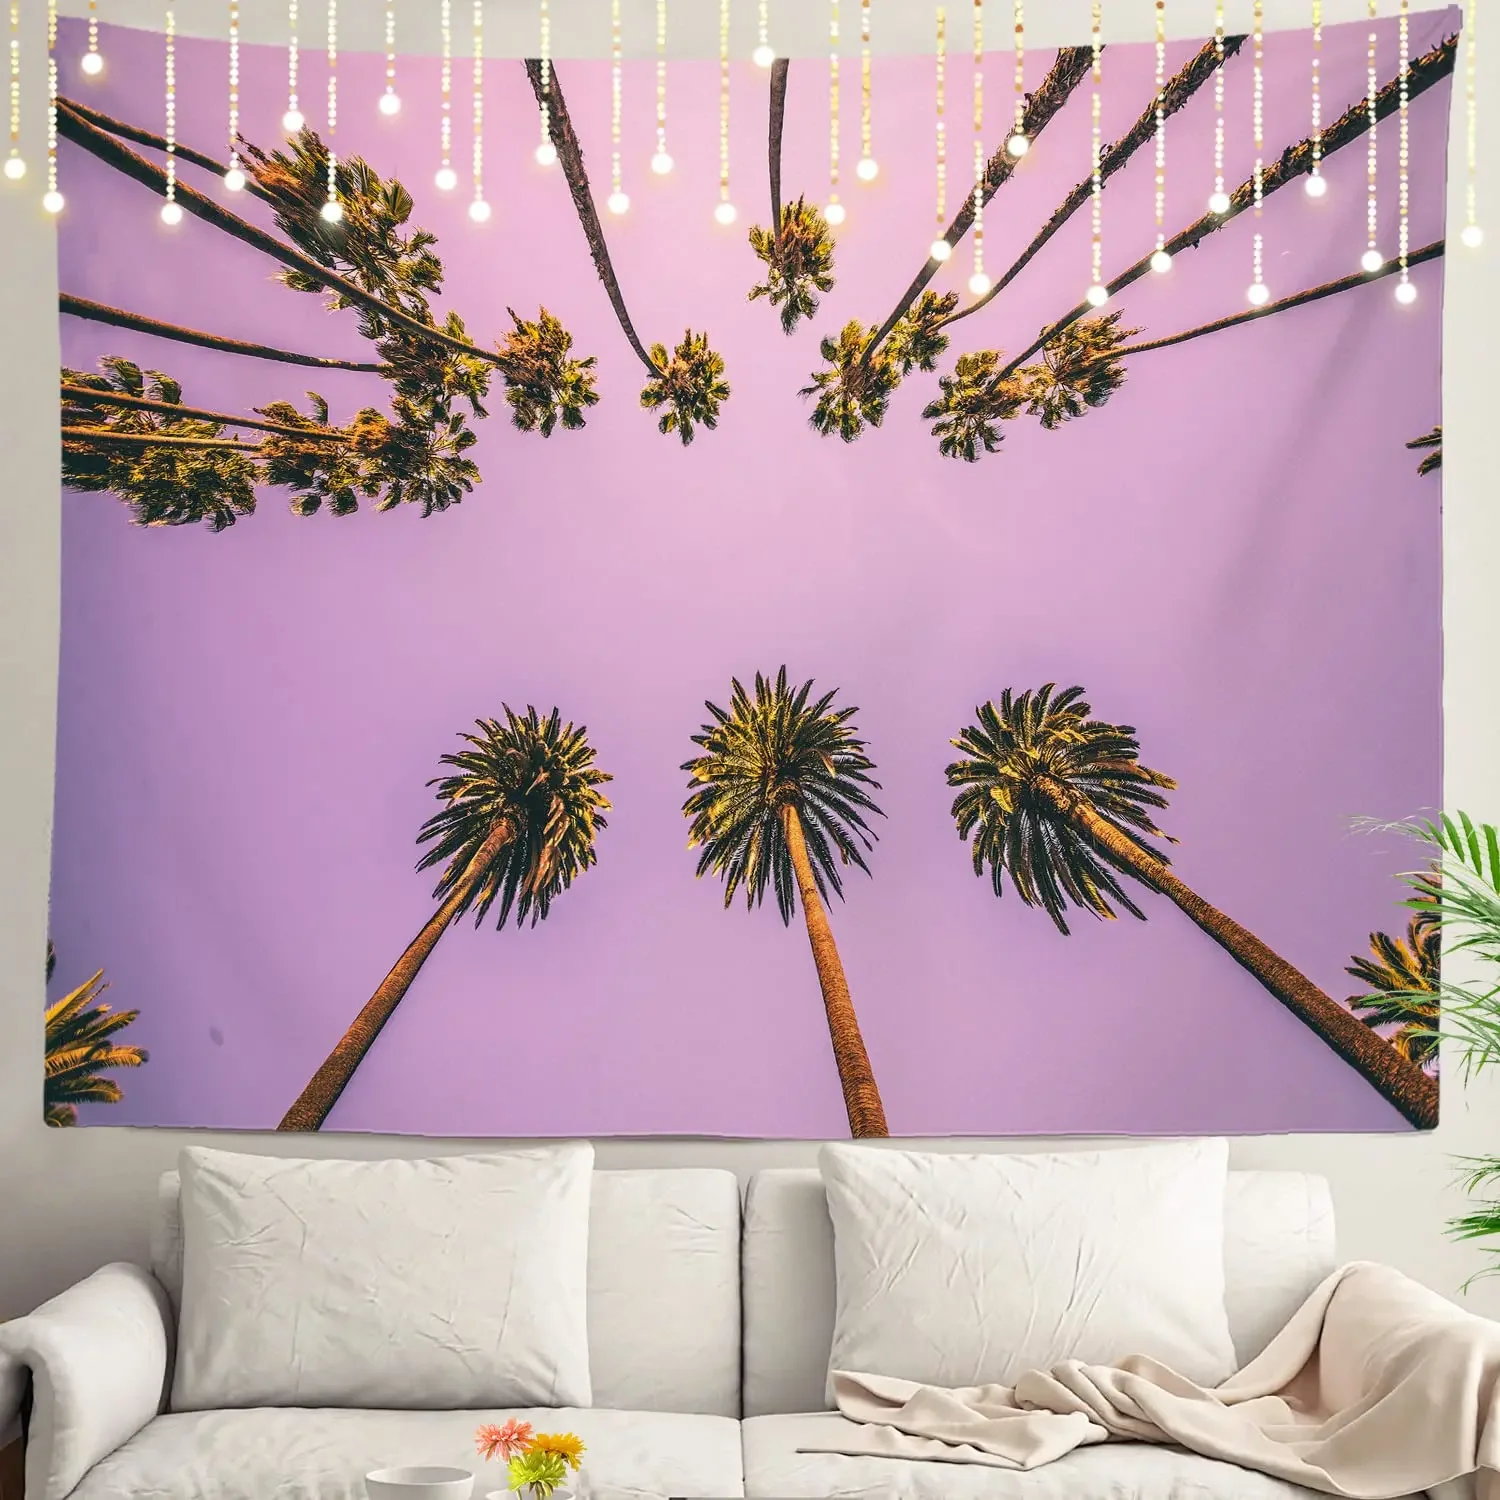 

Palm Trees Tapestry,Los Angeles California Beach At Sunset Wall Hanging Tapestry Psychedelic Decoration Bedroom Living Room Dorm